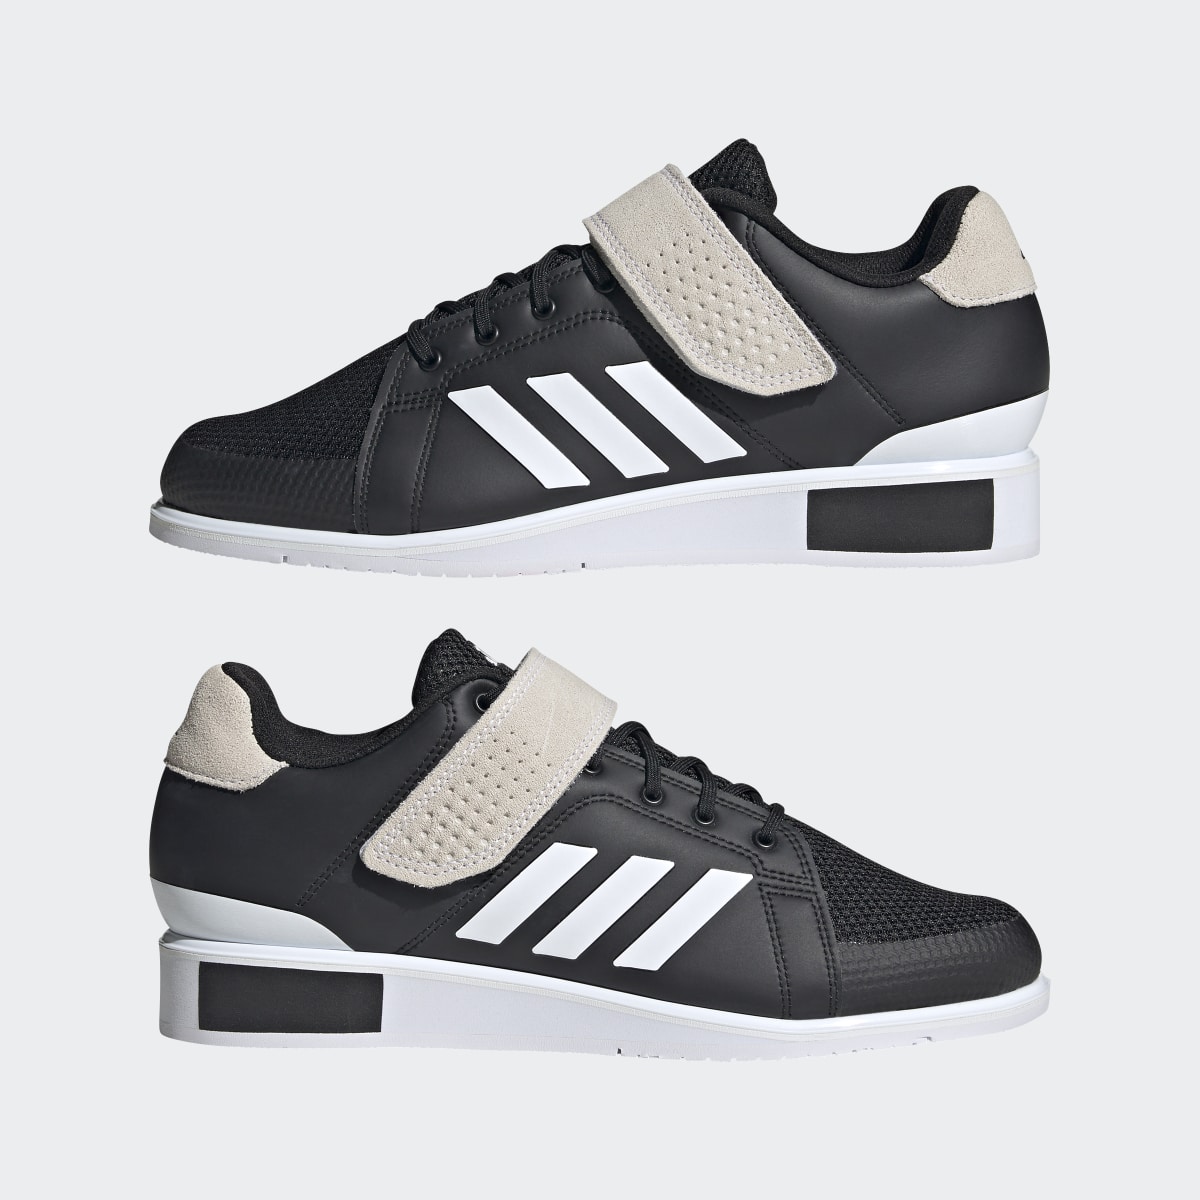 Adidas Power Perfect 3 Tokyo Weightlifting Shoes. 8